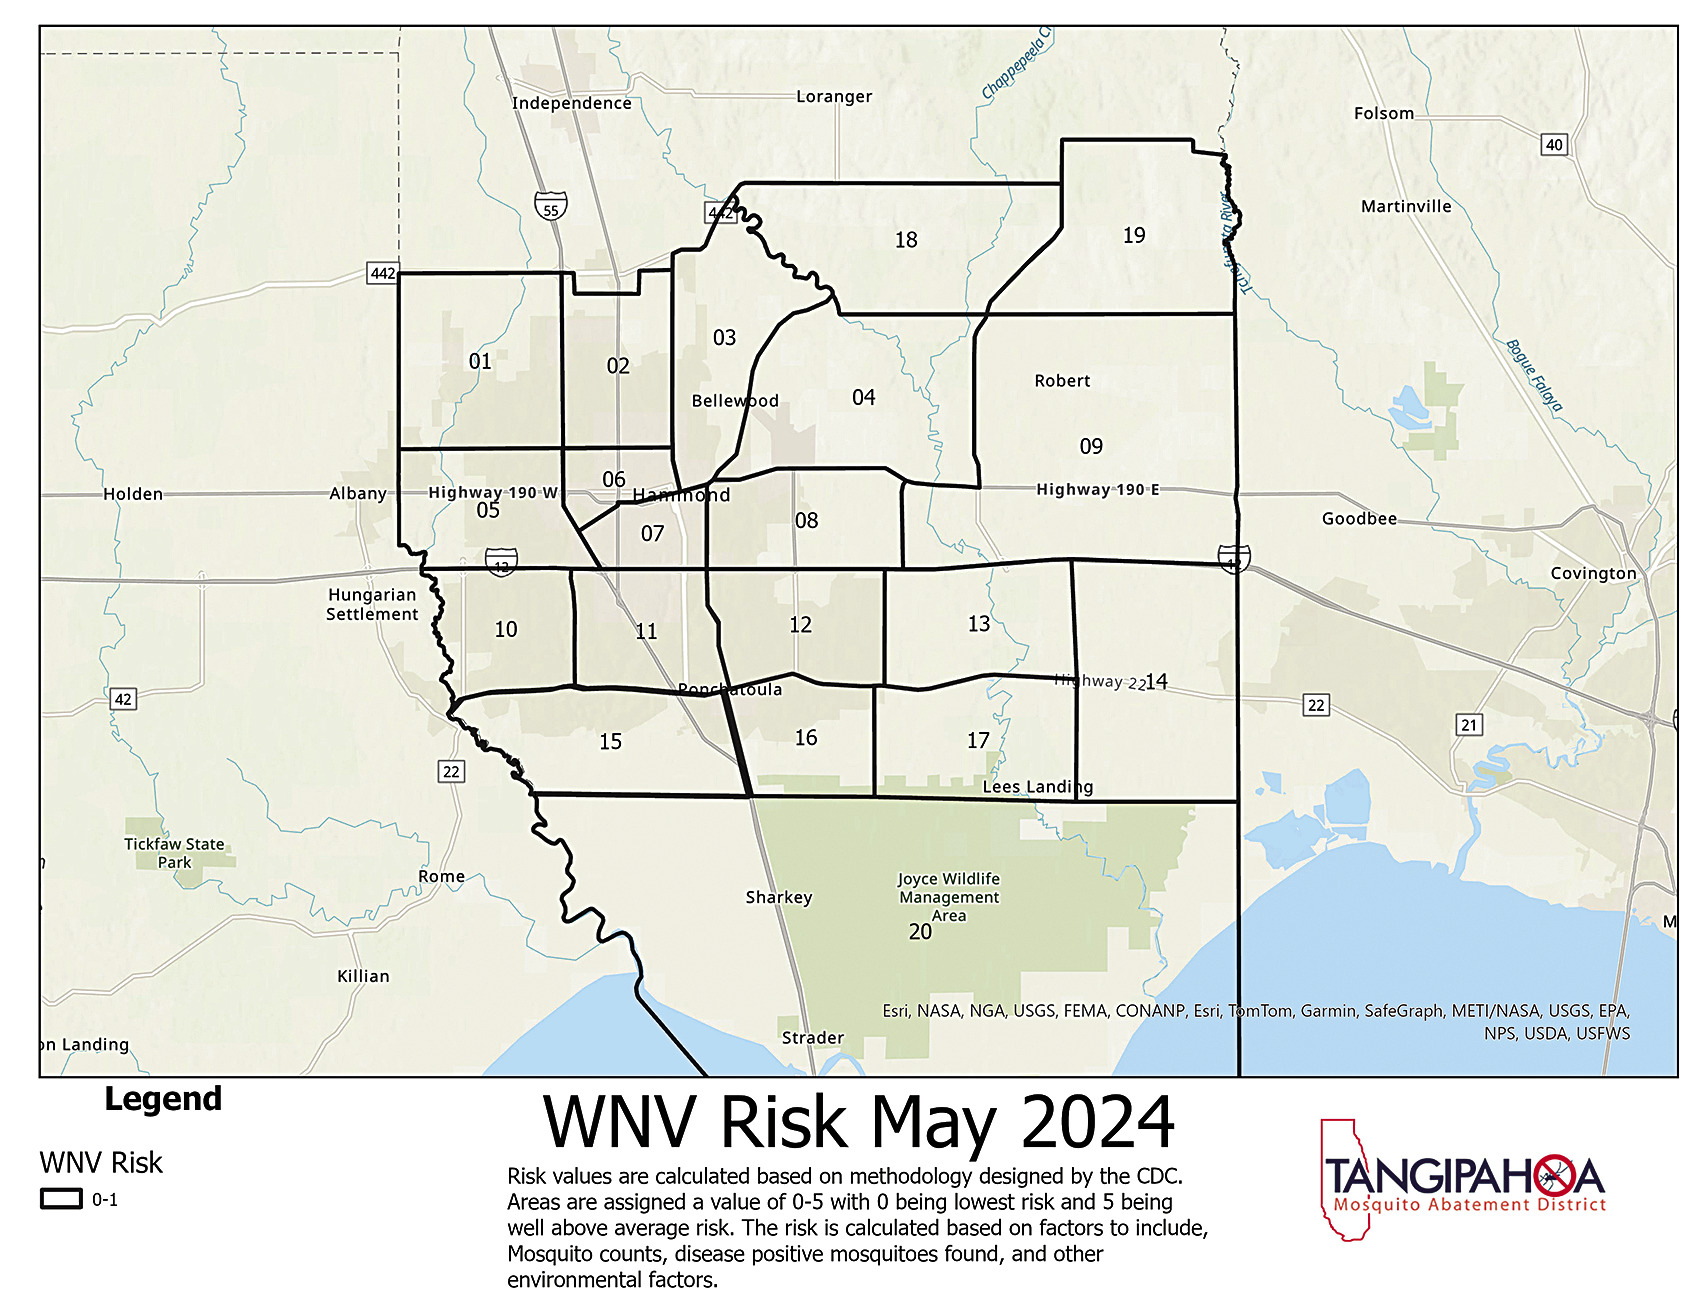 Tangi Mosquito Abatement to Release WNV Maps